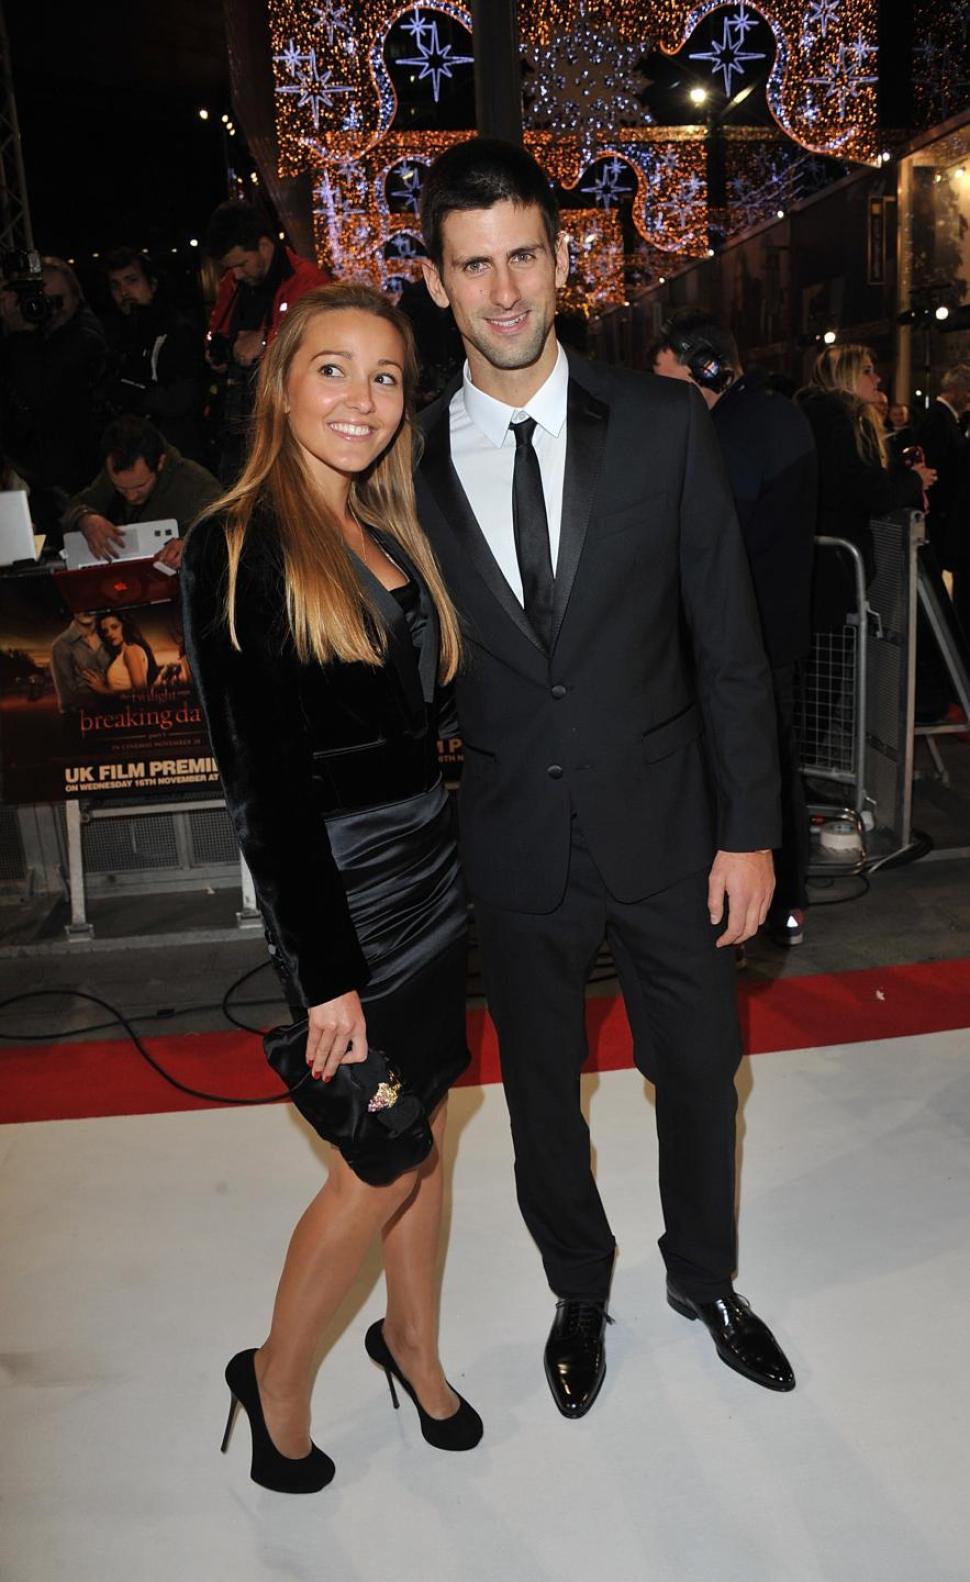 Novak Djokovic and Jelena, seen here attending a movie premiere in London in 2011, are the proud parents of a baby boy named Stefan.